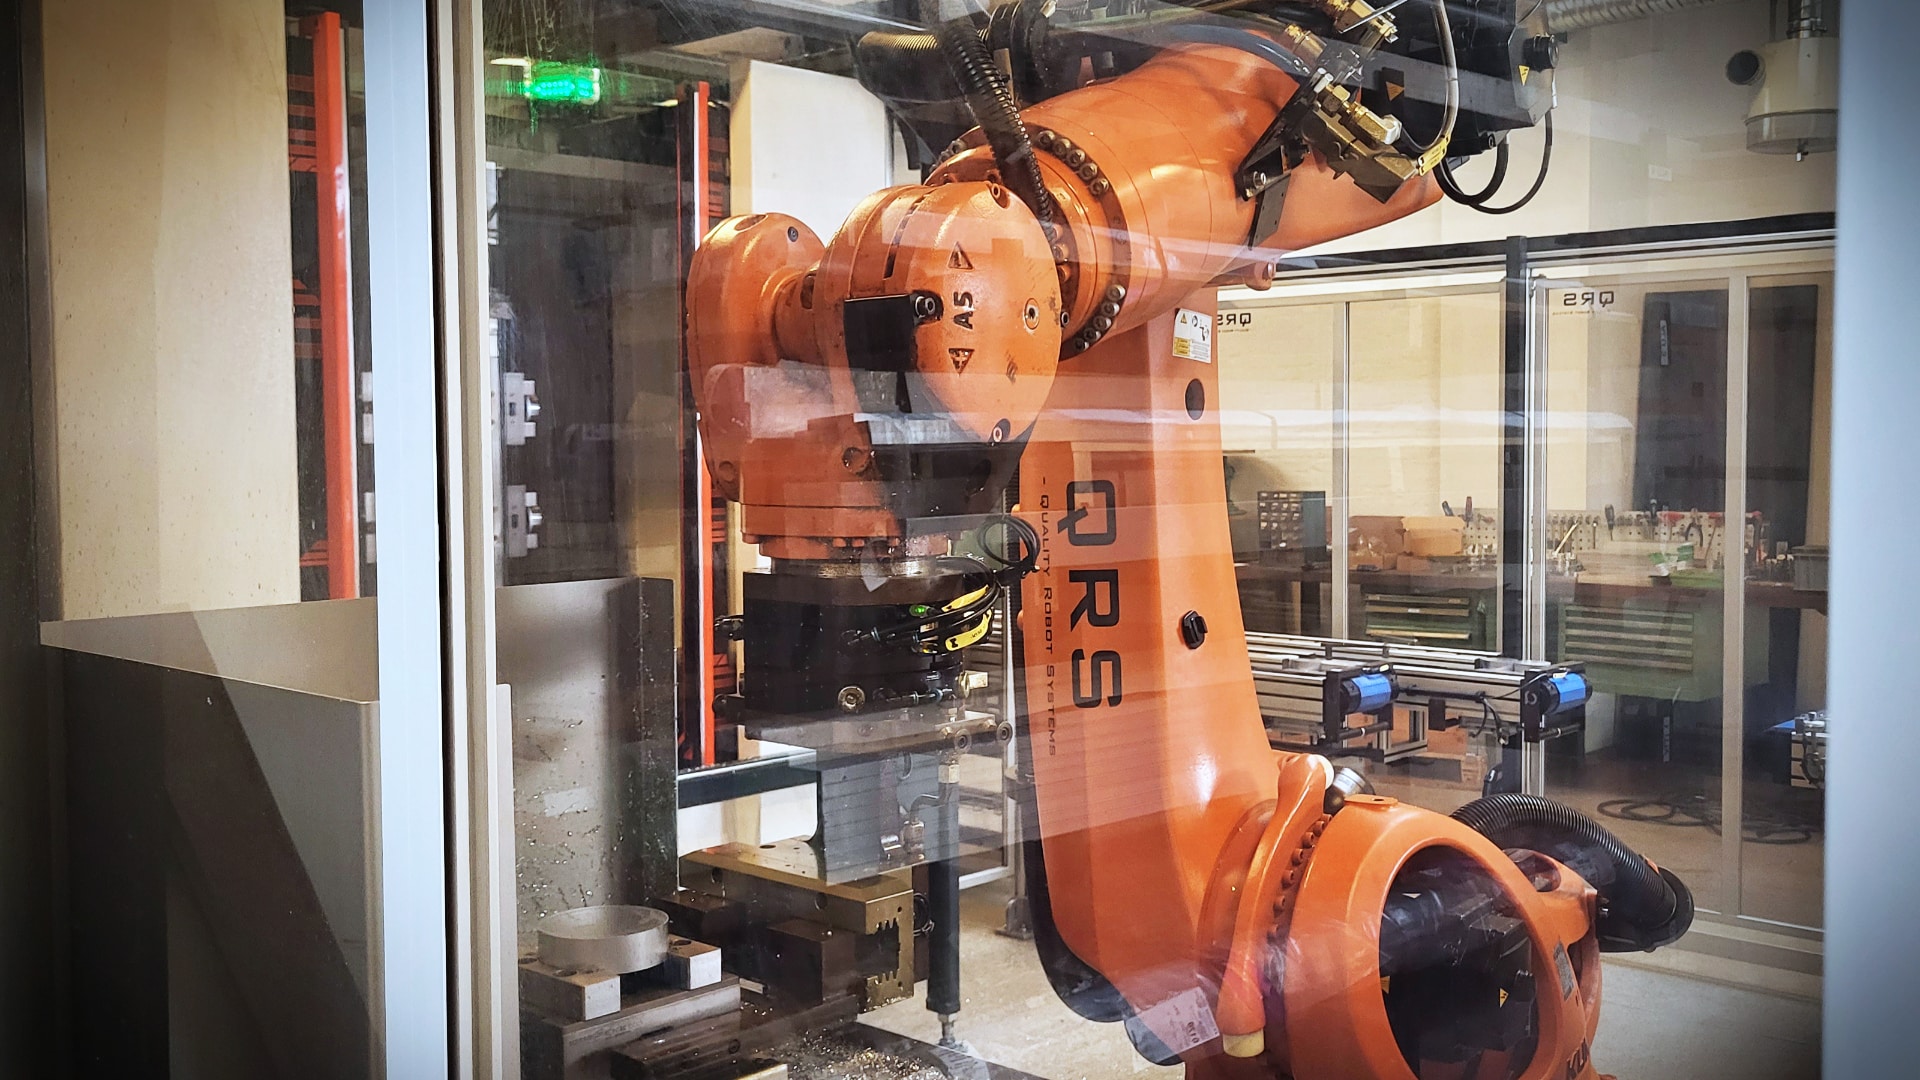 Complex QRS robotic cell consisting of a Kuka KR120 robot operating the clamping station for screw jacks. In the background is the Mazak HCN-4000 milling machine with cube for vice, which the robot operates.